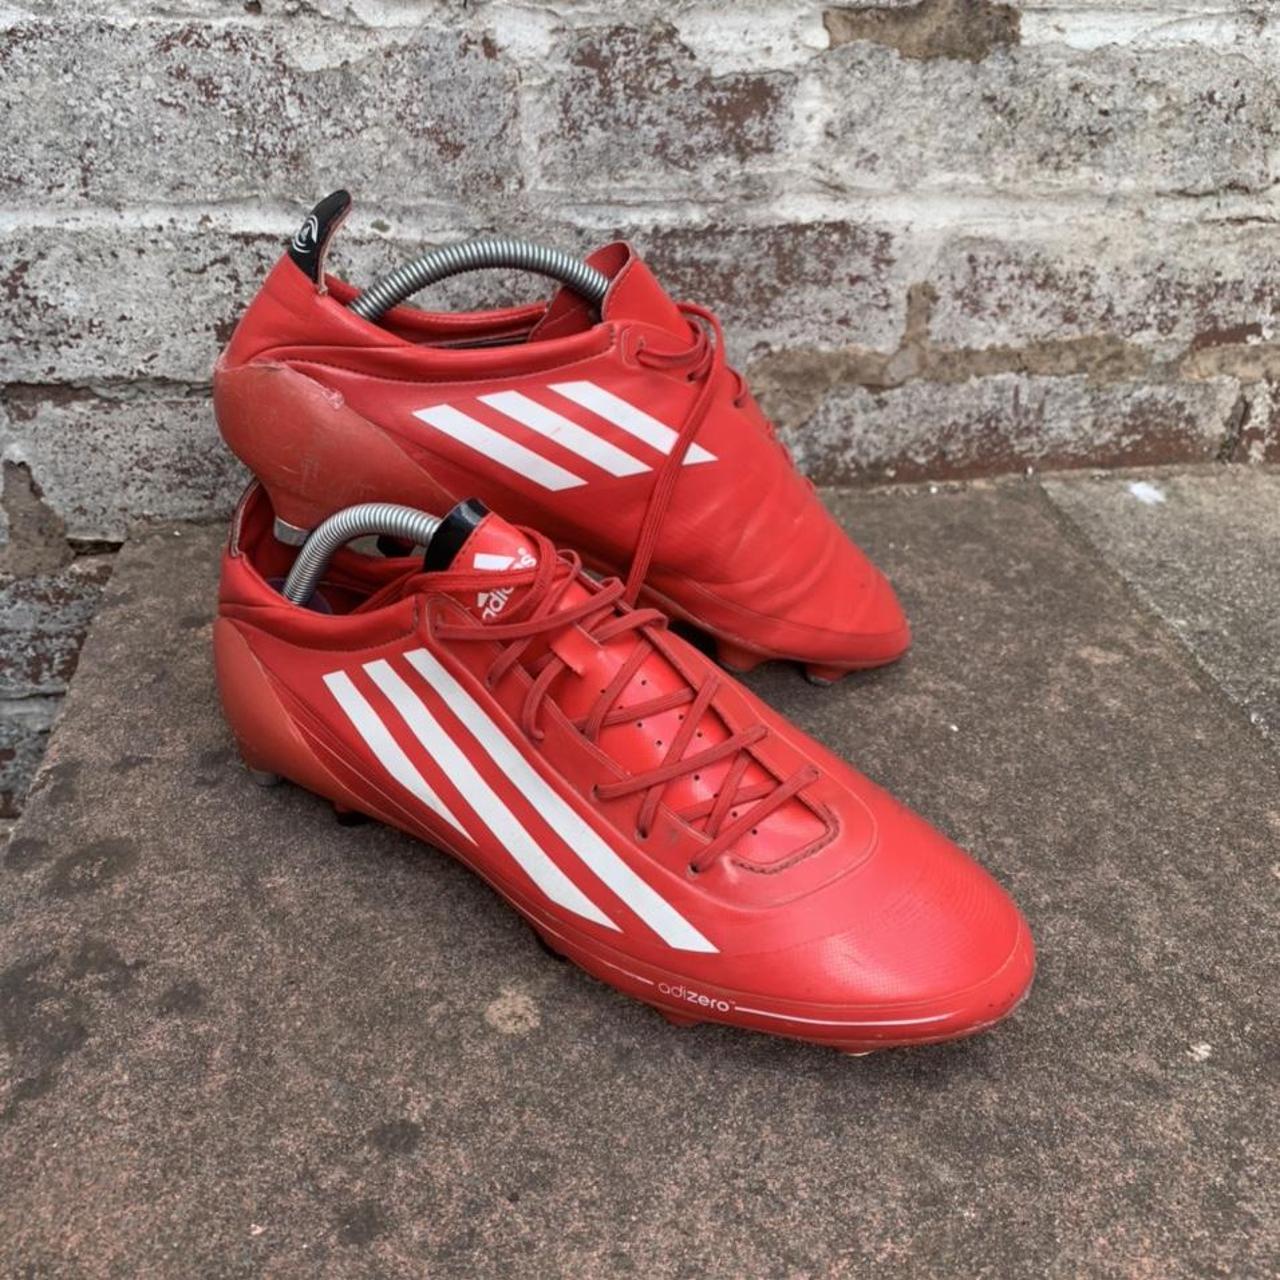 Adidas RS7 SG 2014 Super rare boot Well worn, with... - Depop